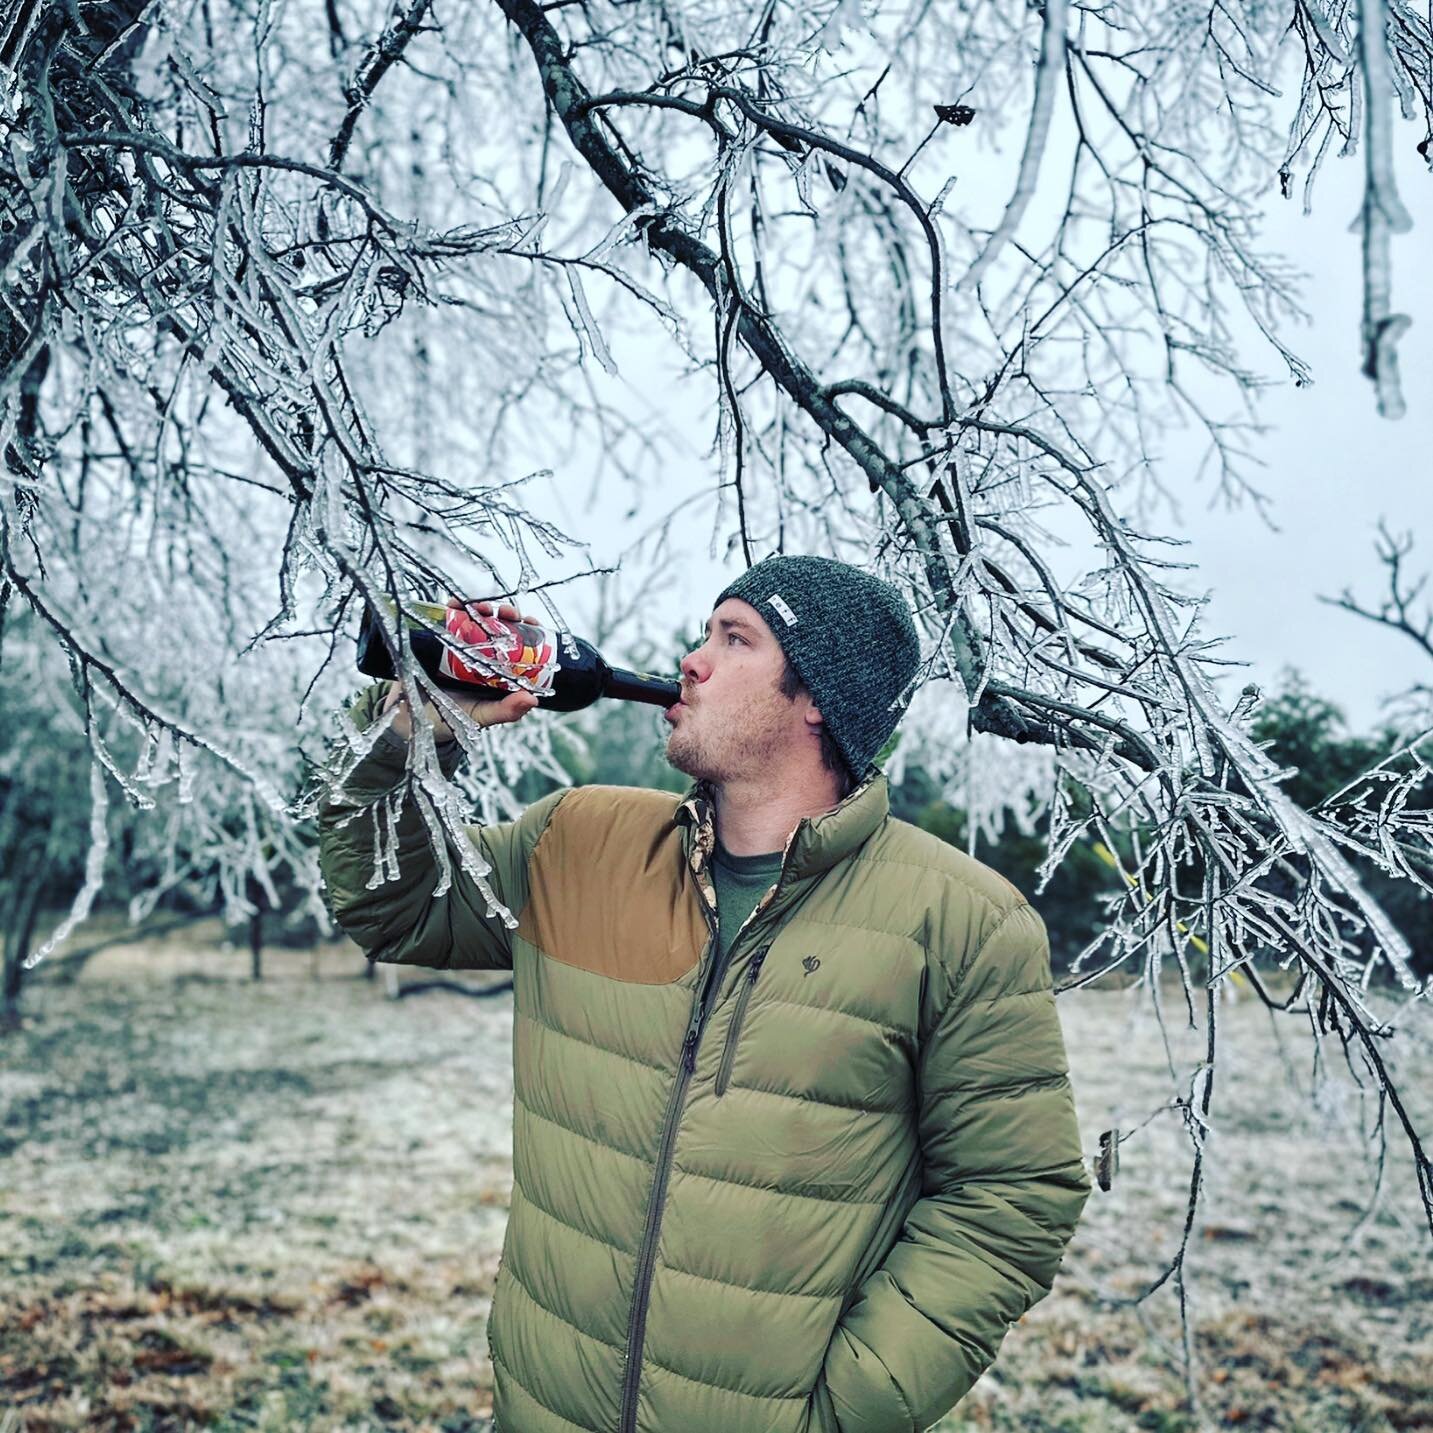 On icy, cold days we stay warm the only way we know how&hellip; by drinking Texas Montepulicano!!